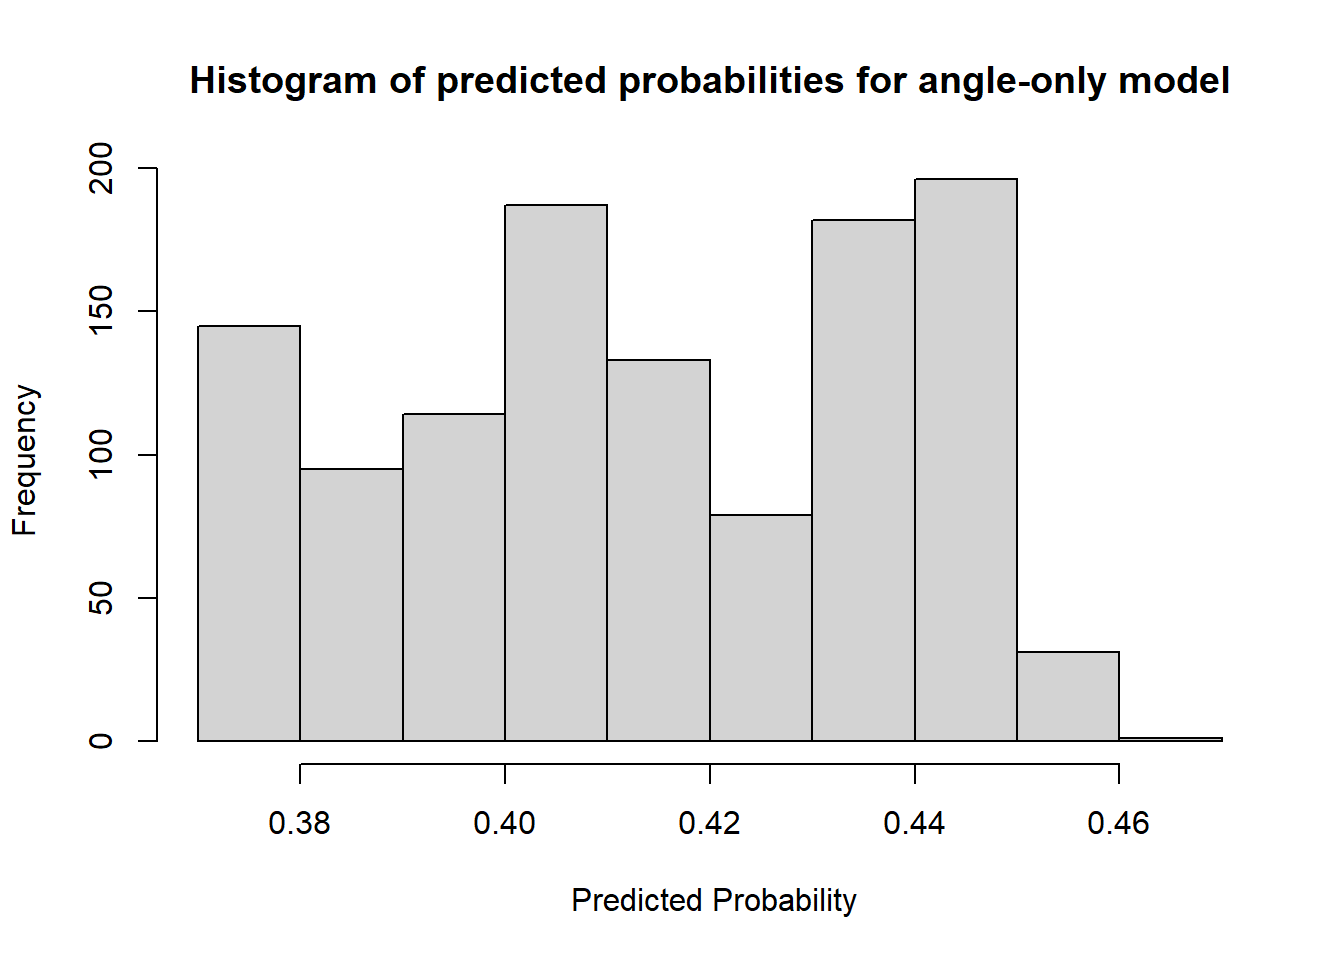 All predicted probabilities are below 50%